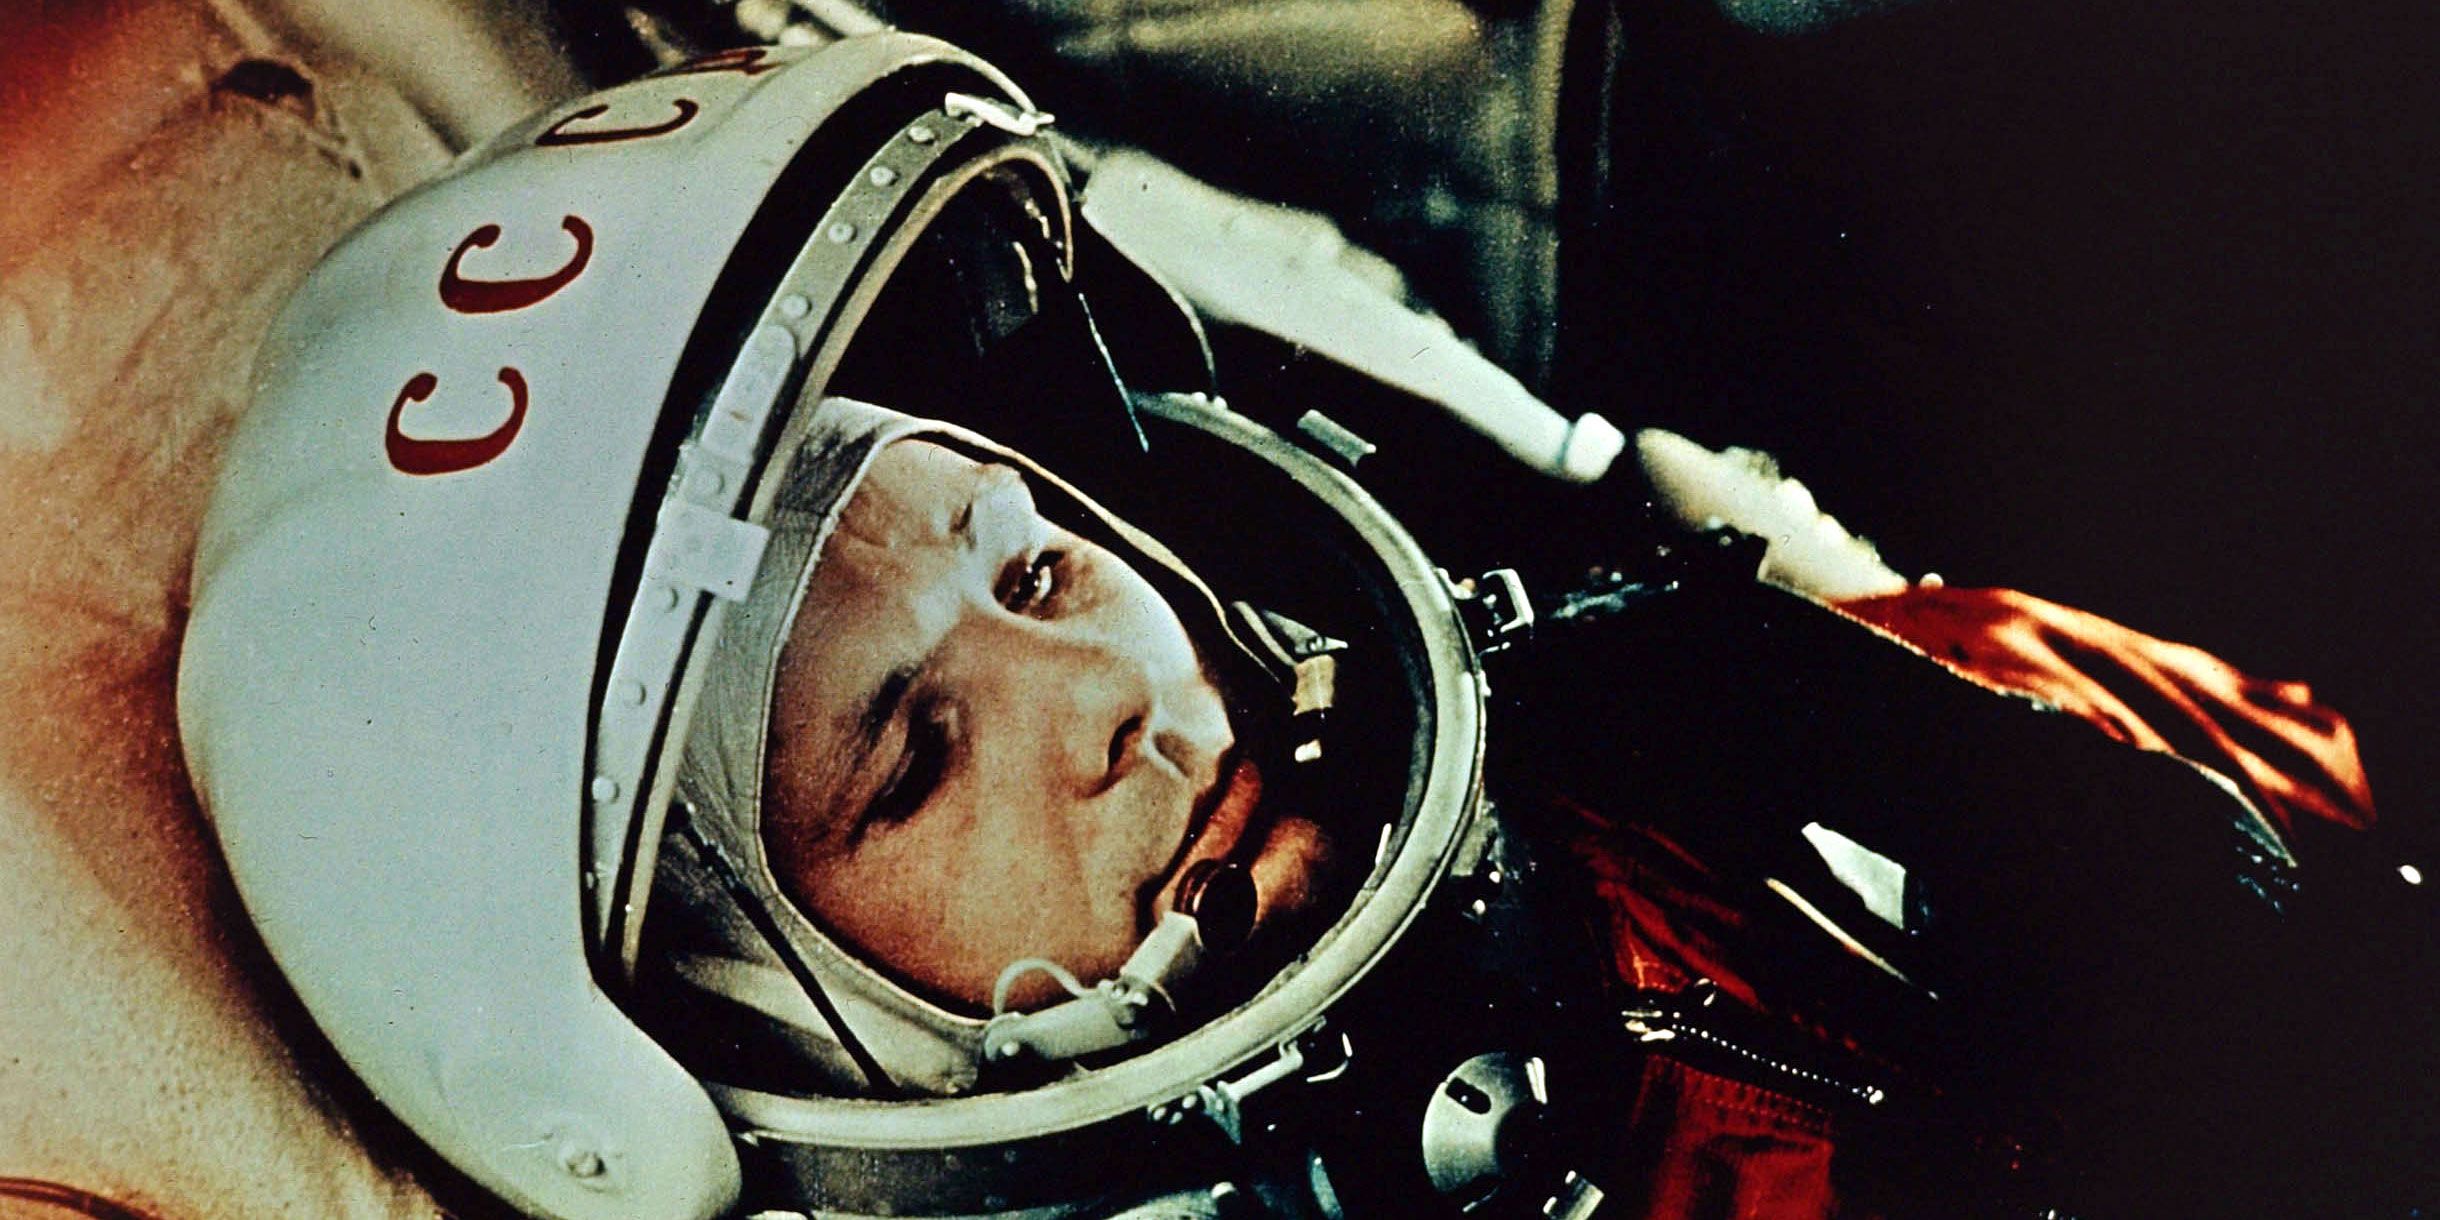 What Happens To A Dead Body In Space? (Realistically) 